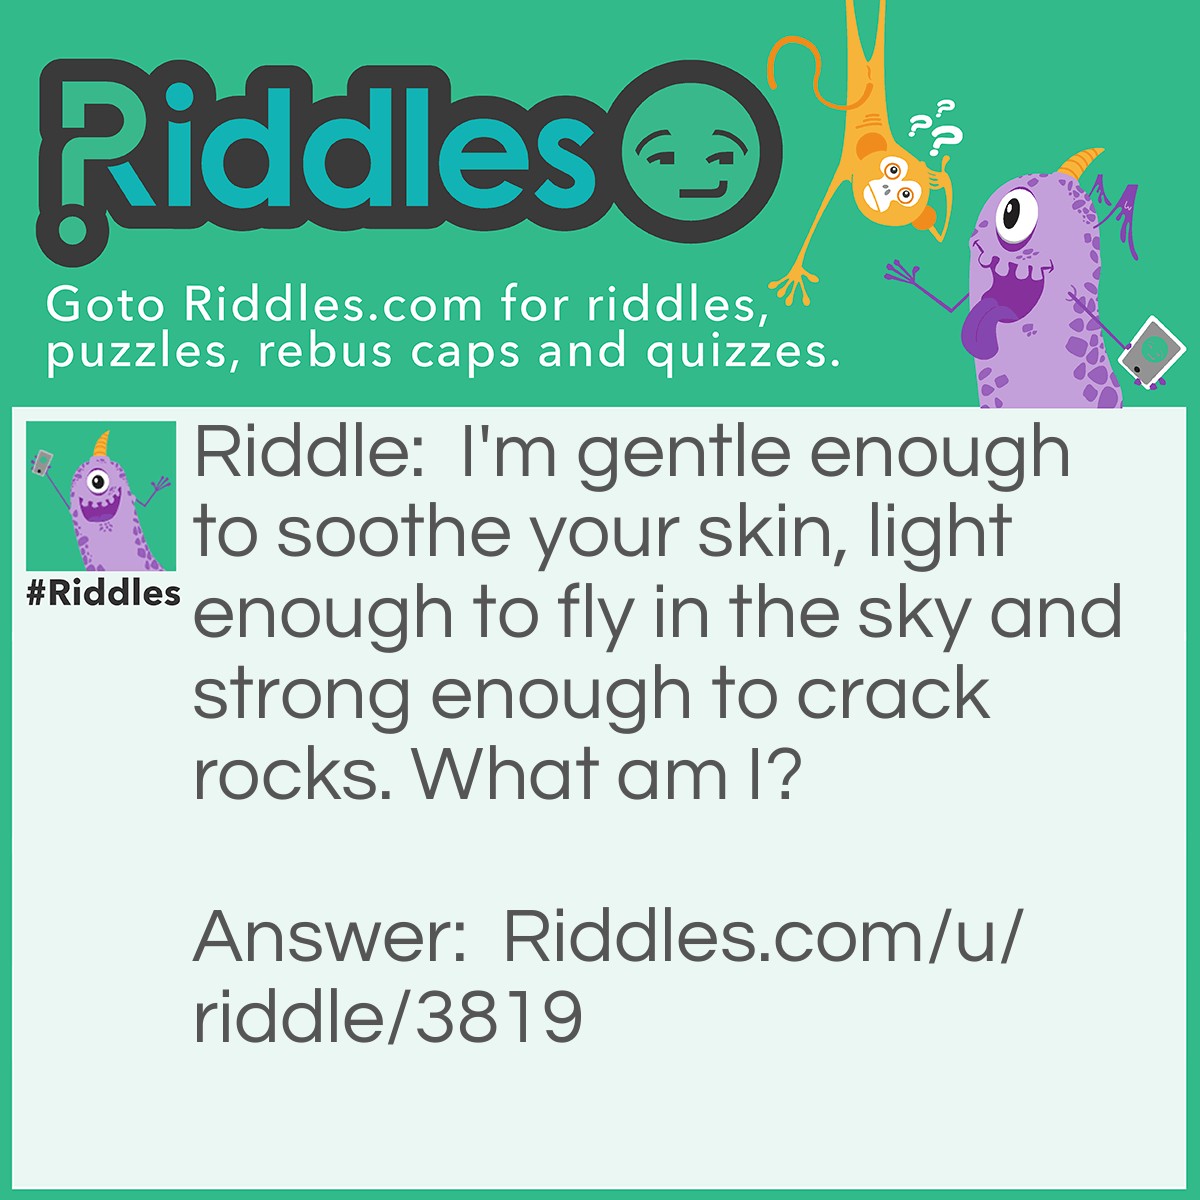 Riddle: I'm gentle enough to soothe your skin, light enough to fly in the sky and strong enough to crack rocks. What am I? Answer: Water.